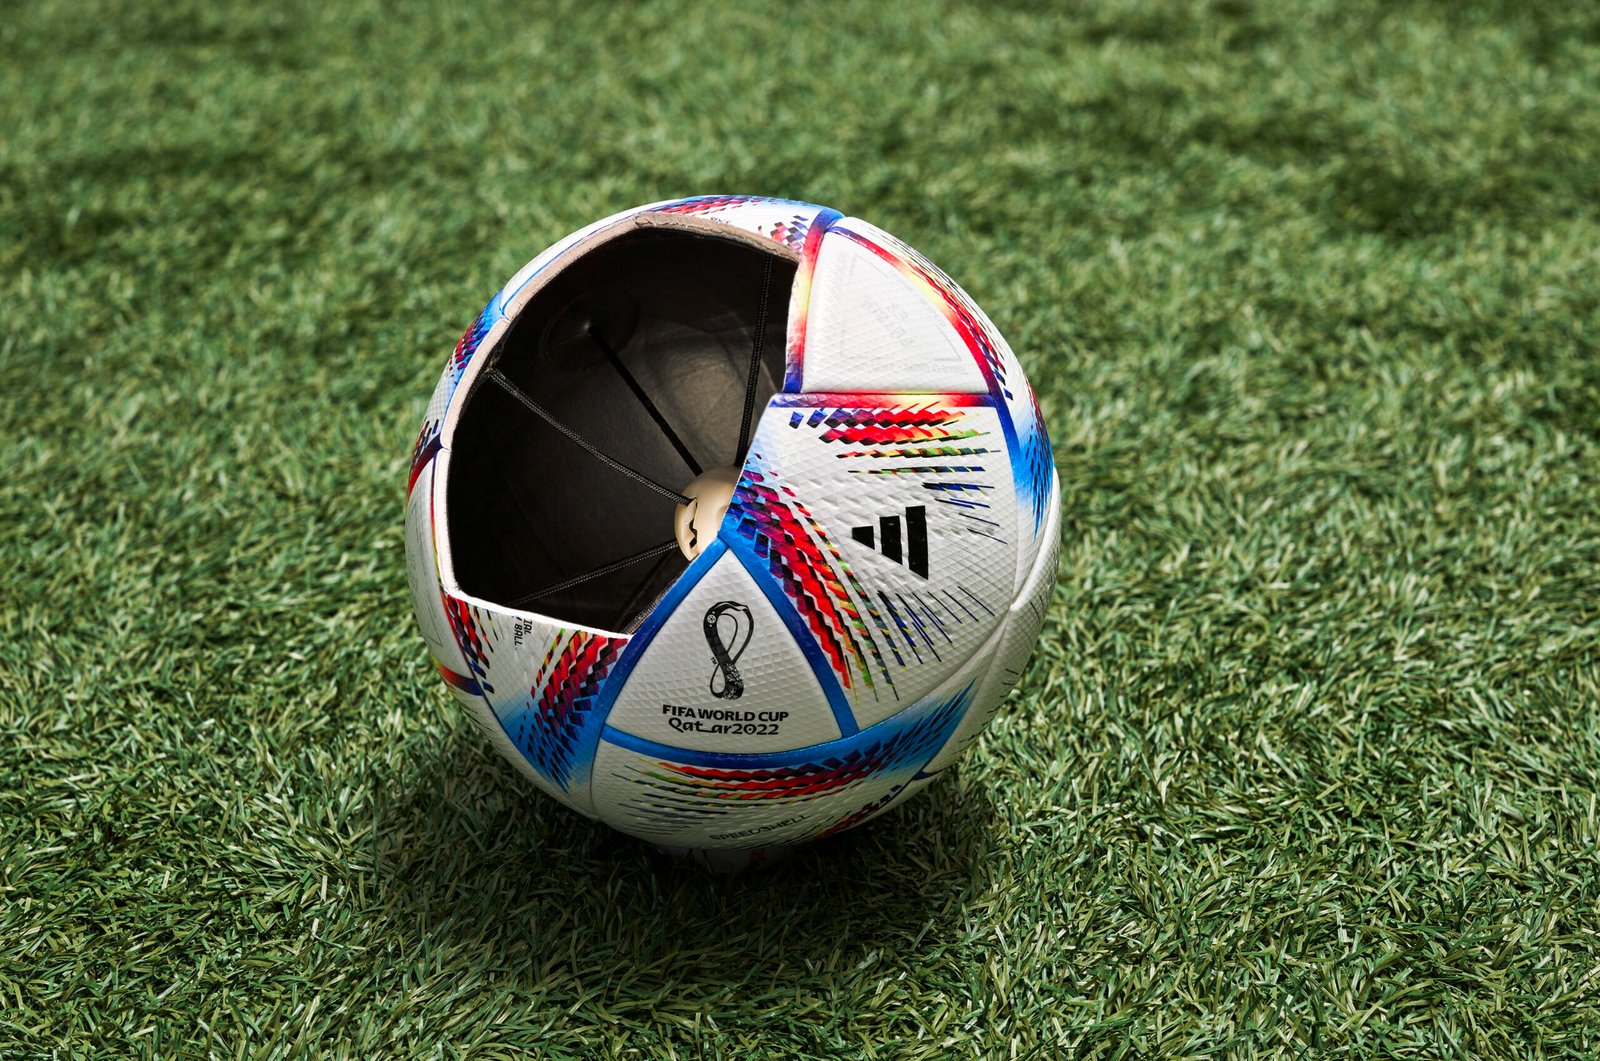 ADIDAS REVEALS THE FIRST FIFA WORLD CUPTM OFFICIAL MATCH BALL FEATURING CONNECTED BALL TECHNOLOGY